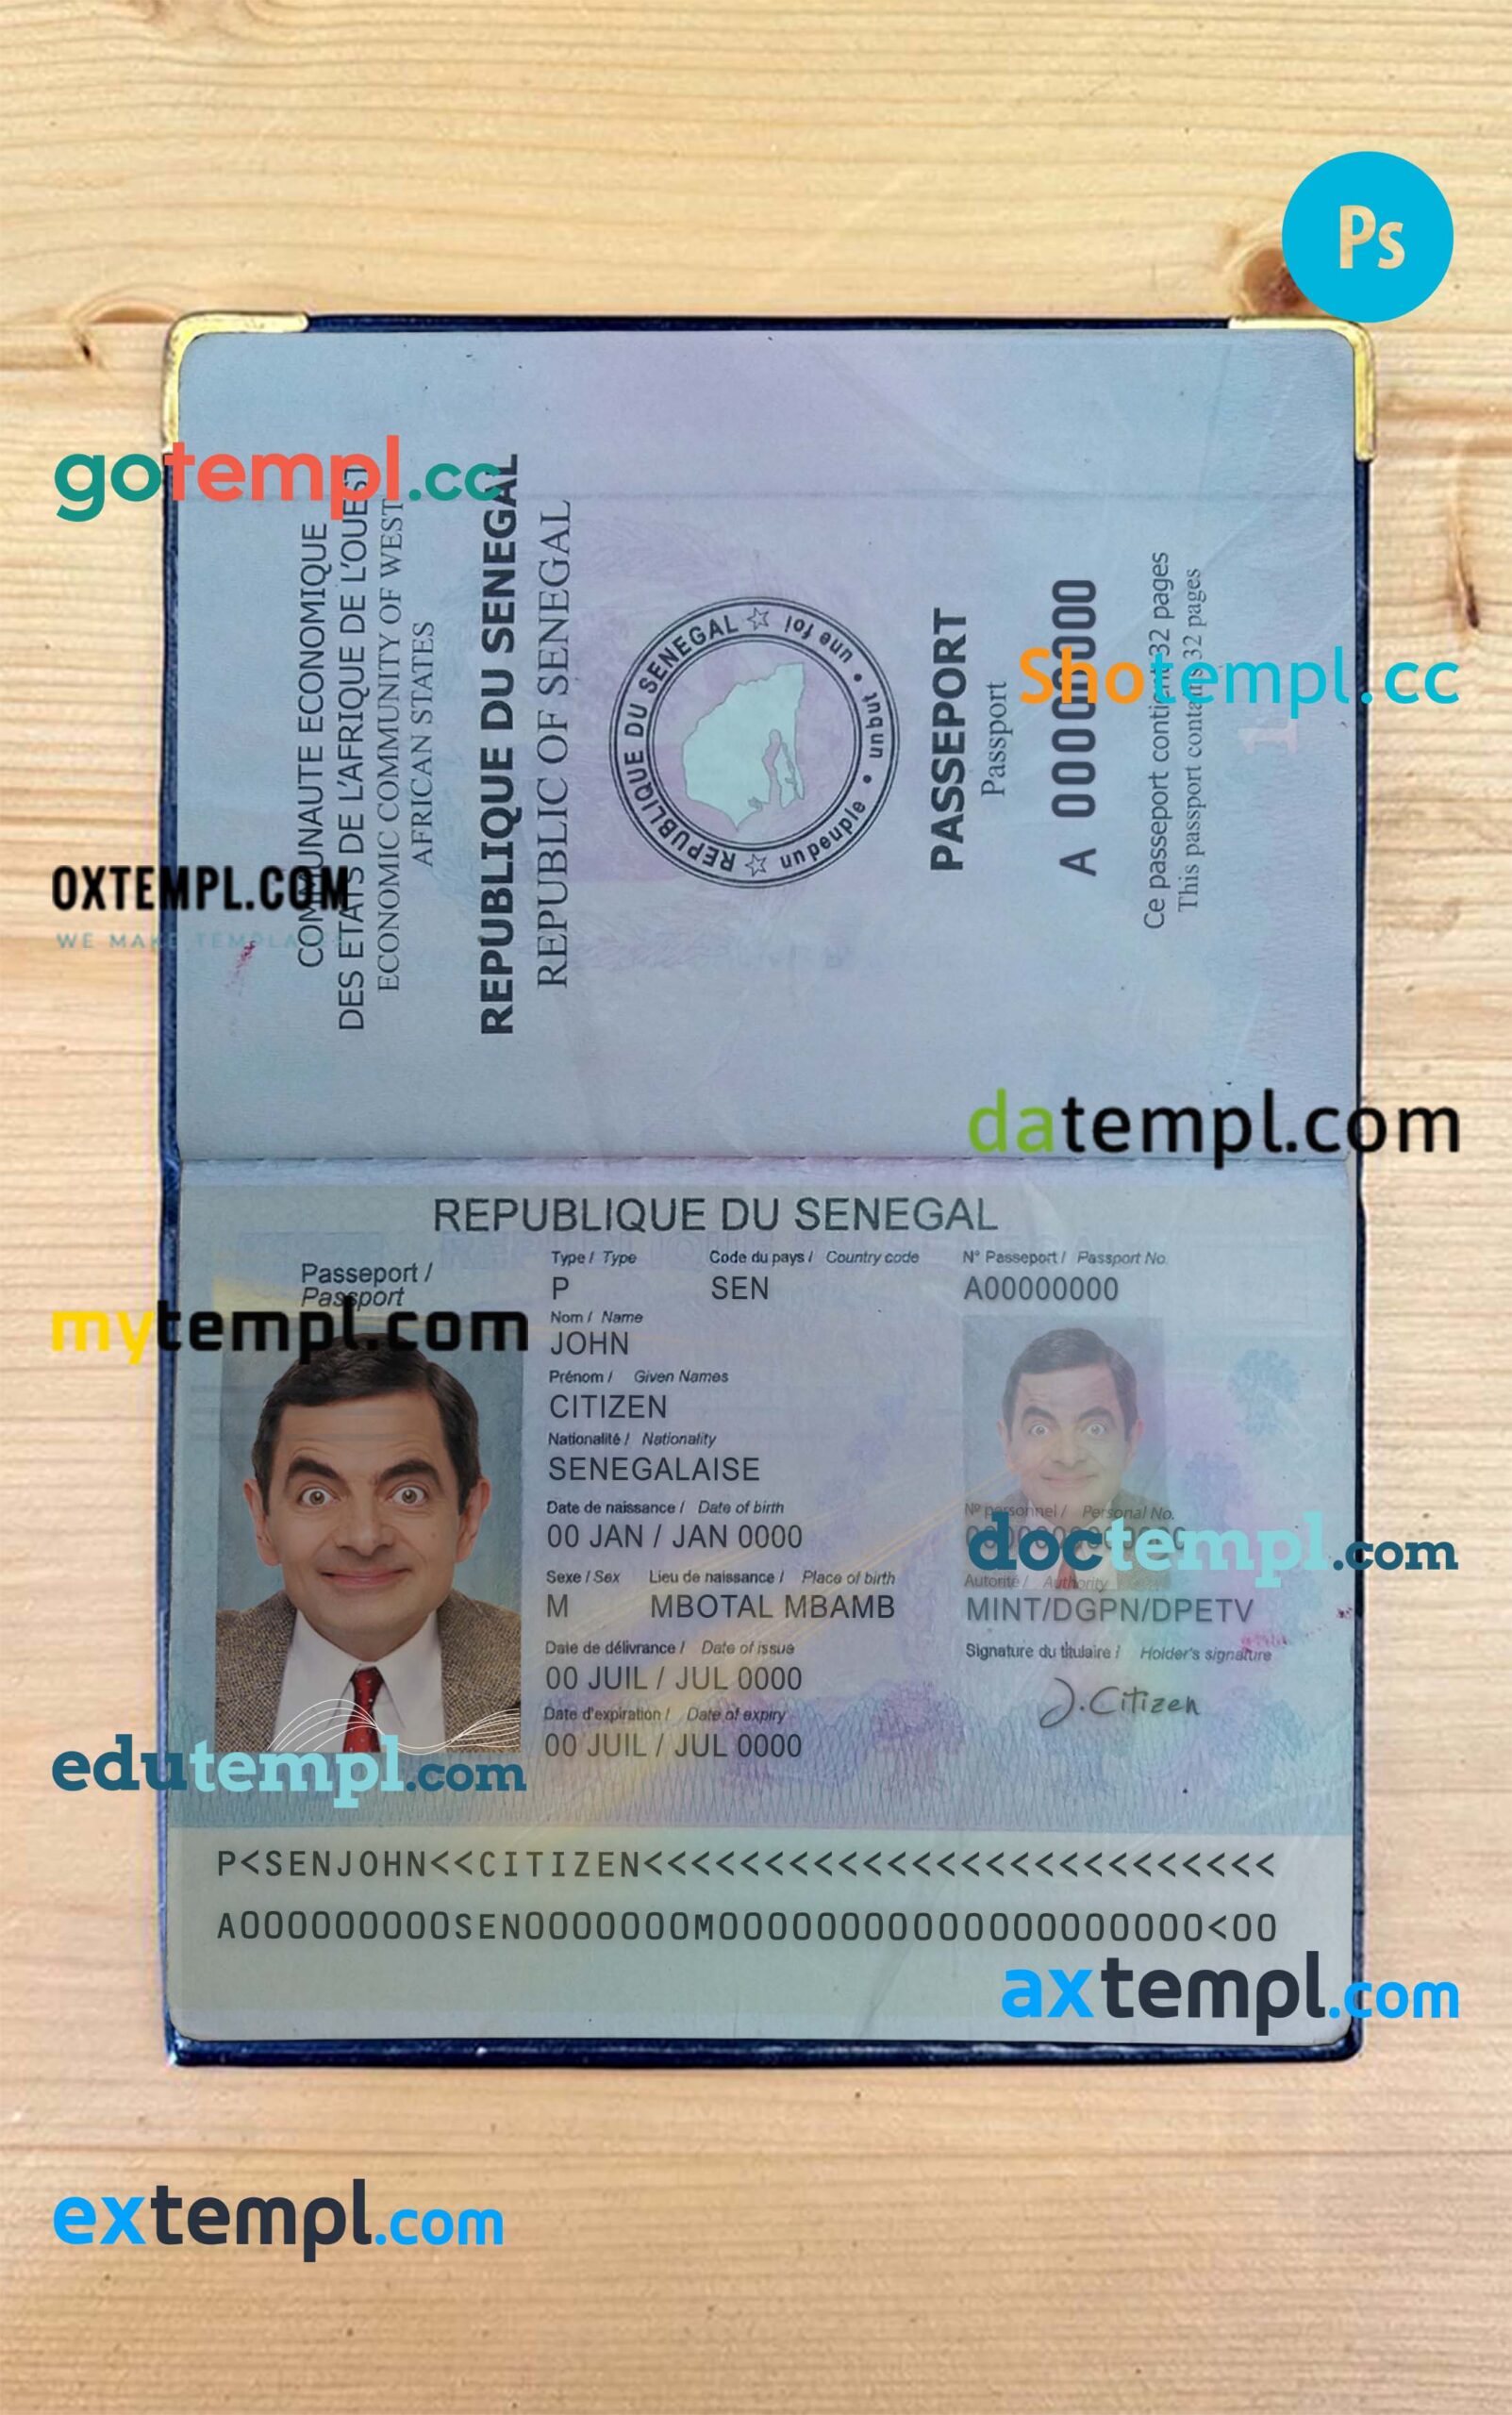 Senegal passport PSD files, editable scan and photo-realistic look sample, 2 in 1